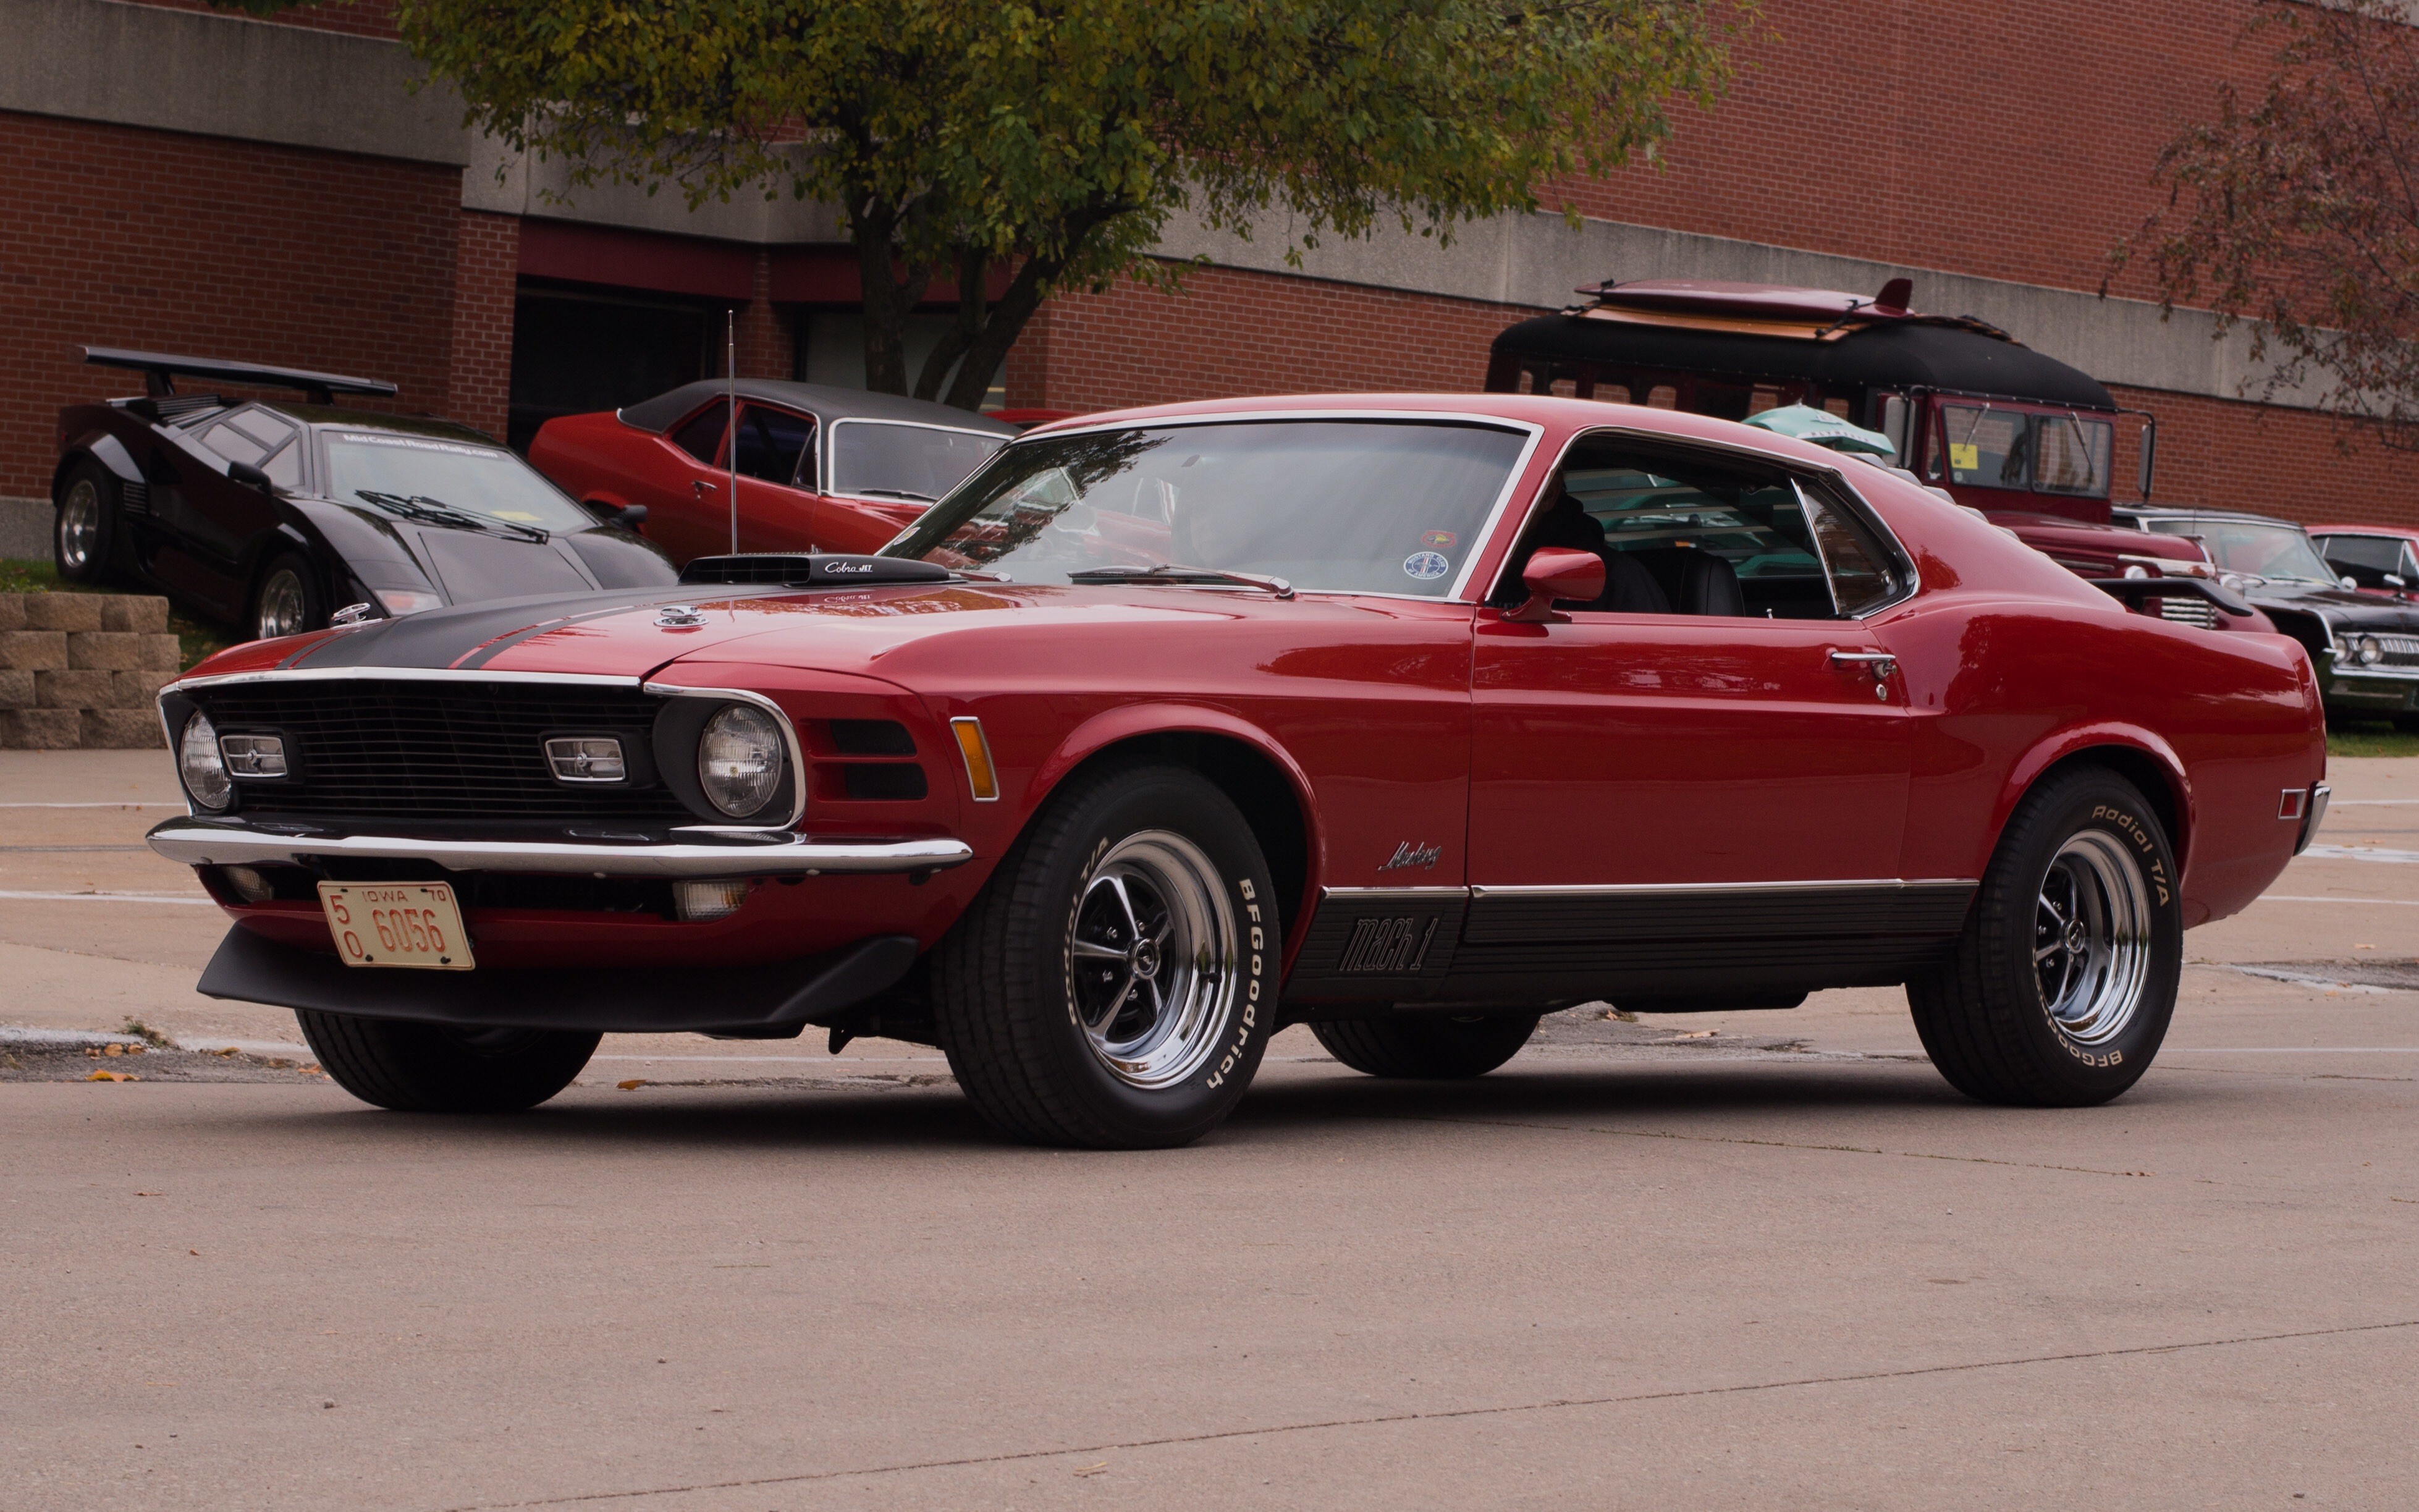 Ford Mustang, Muscle Cars, Mach 1 Wallpaper